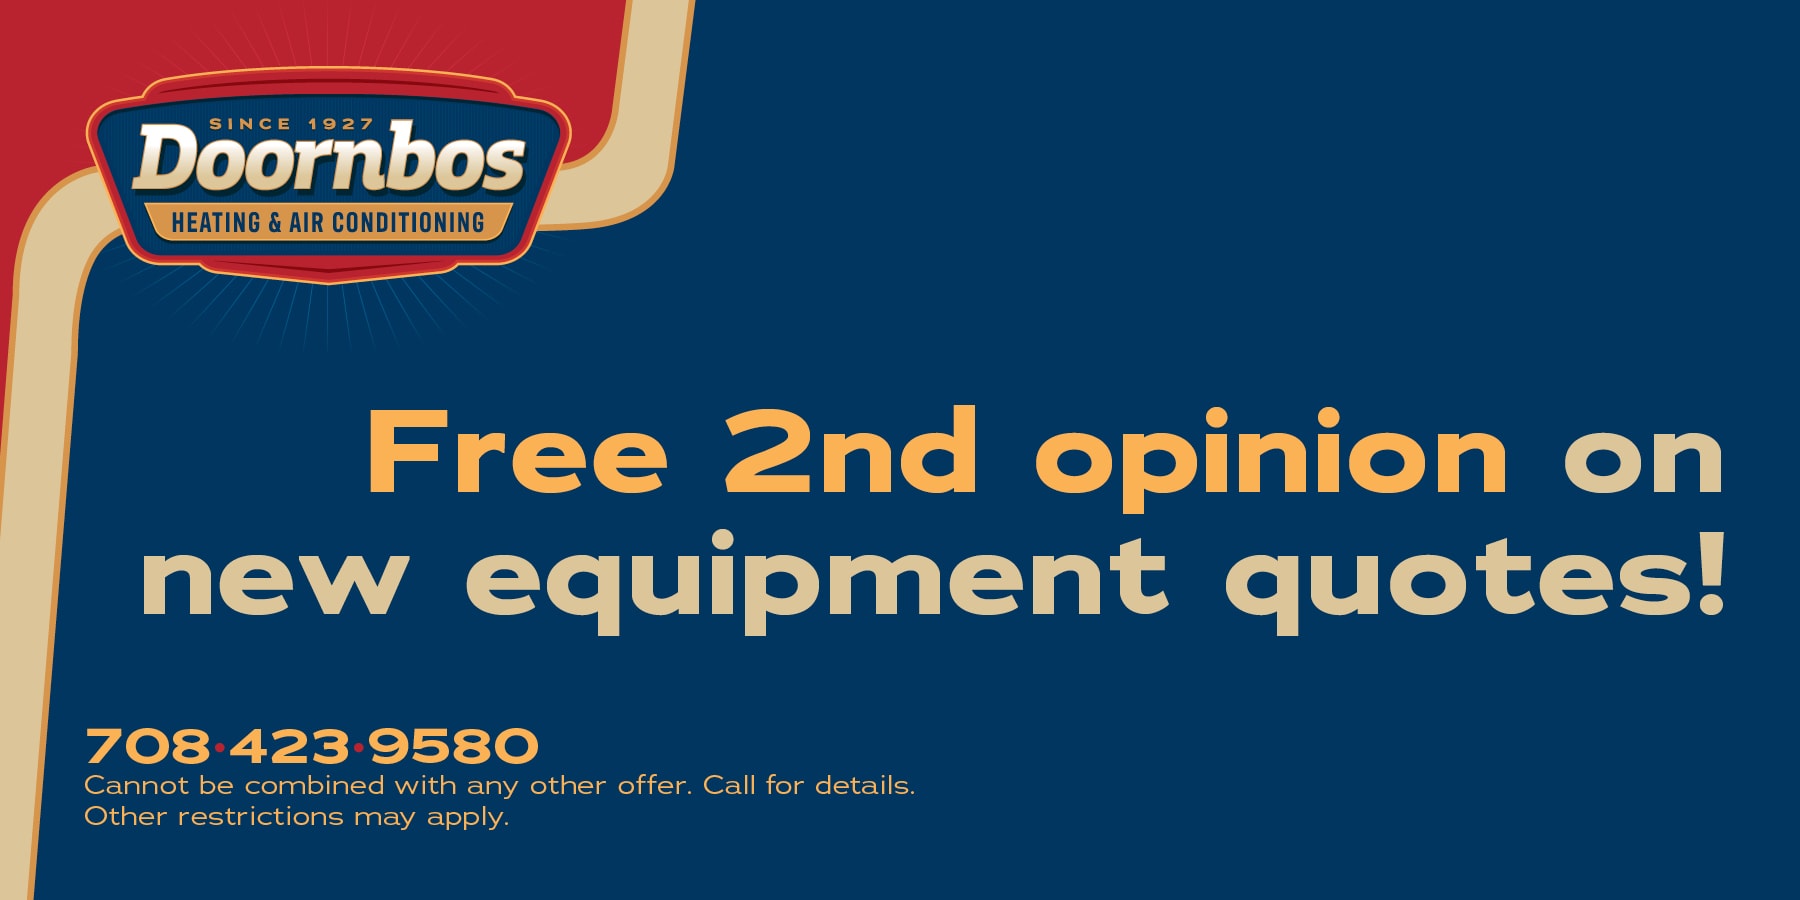 Free second opinion on new equipment quotes.